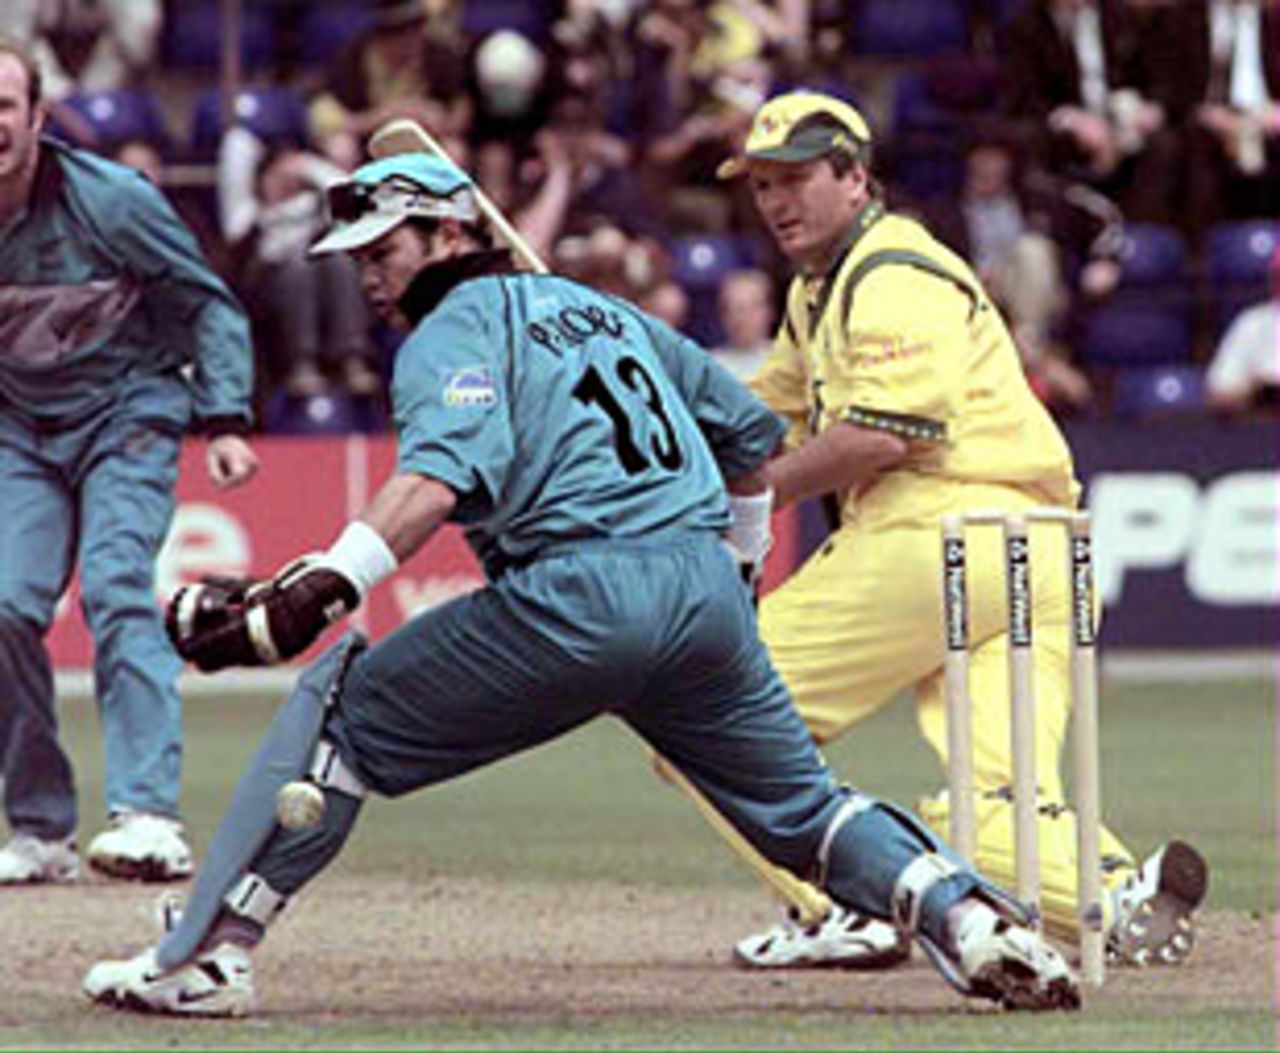 New Zealand's wicketkeeper Adam Parore (C) spills a catch chance from Australia's Steve Waugh off the bowling of Chris Harris during their Cricket World Cup match at Sophia Gardens, Cardiff 20 May 1999.